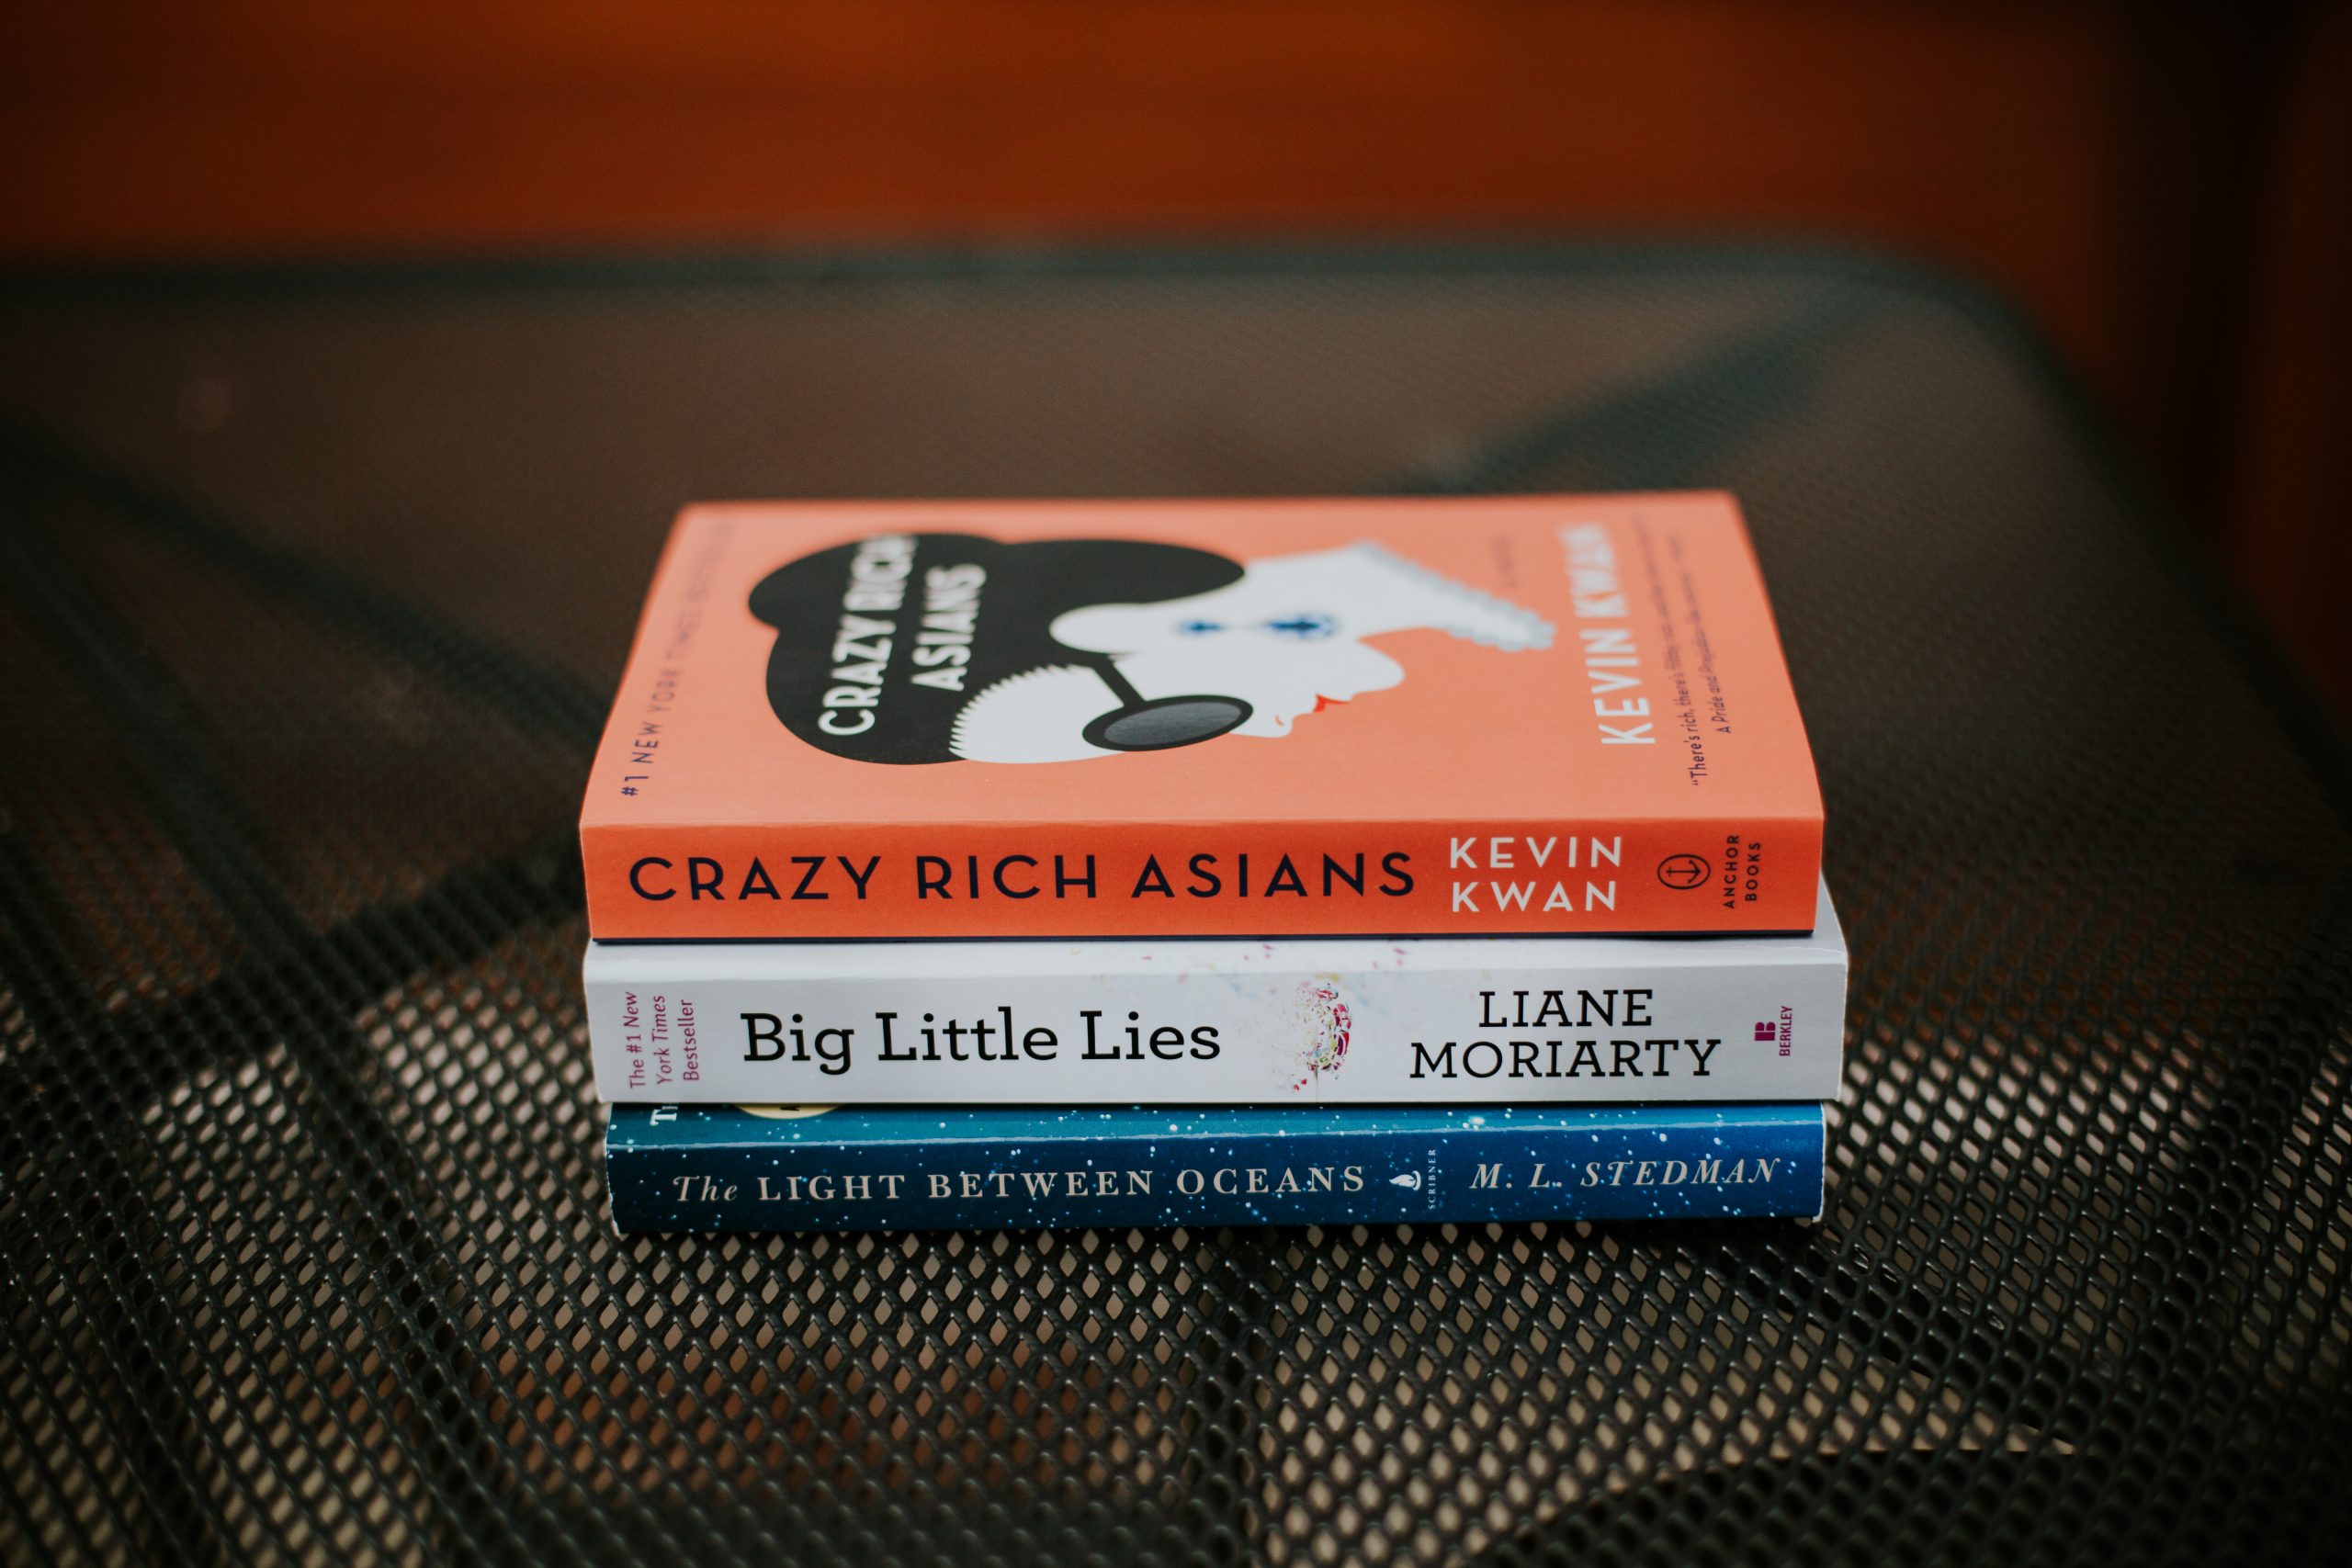 book review round 4, book reviews, what books to read, quarantine books to read, books to read, liane moriarty, crazy rich asians // grace white a southern drawl